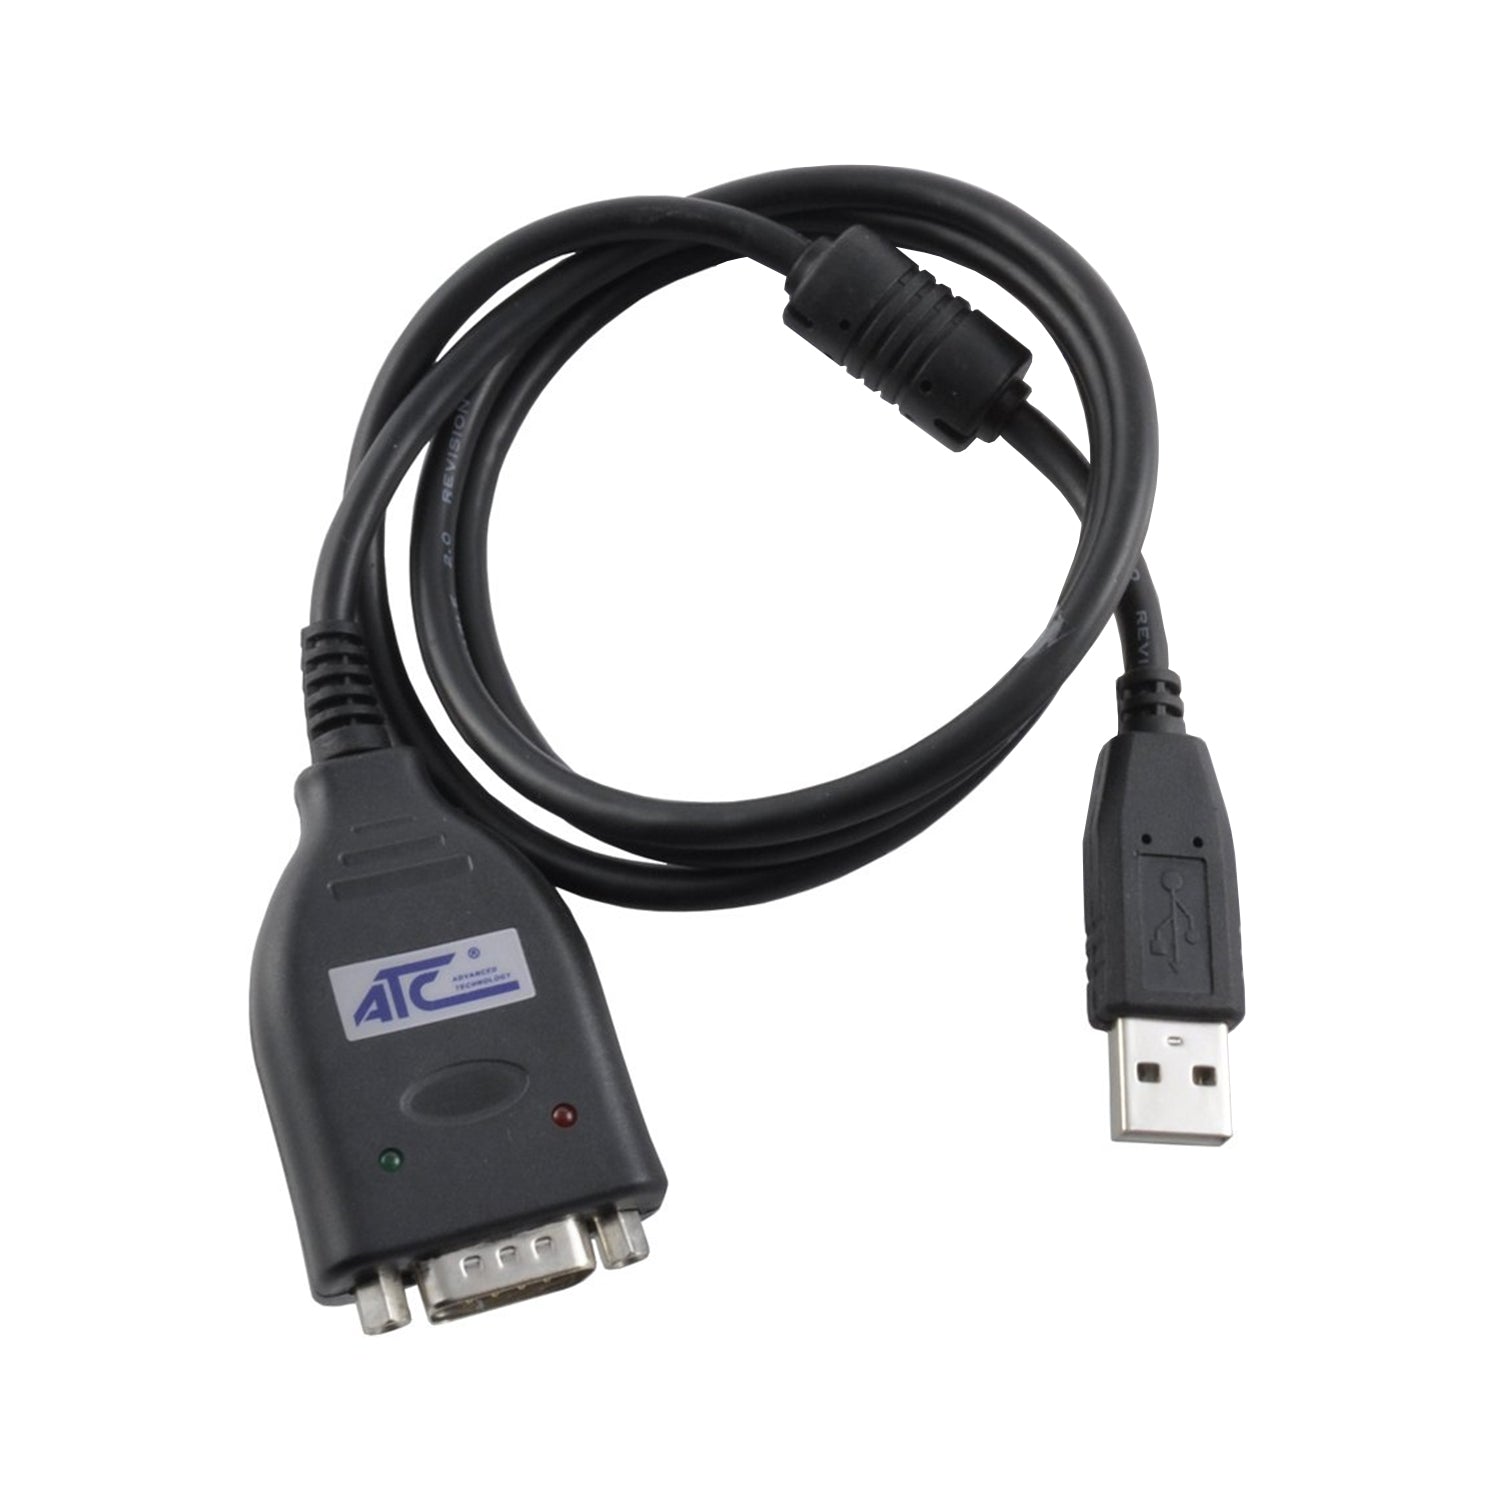 usb to rs232 driver